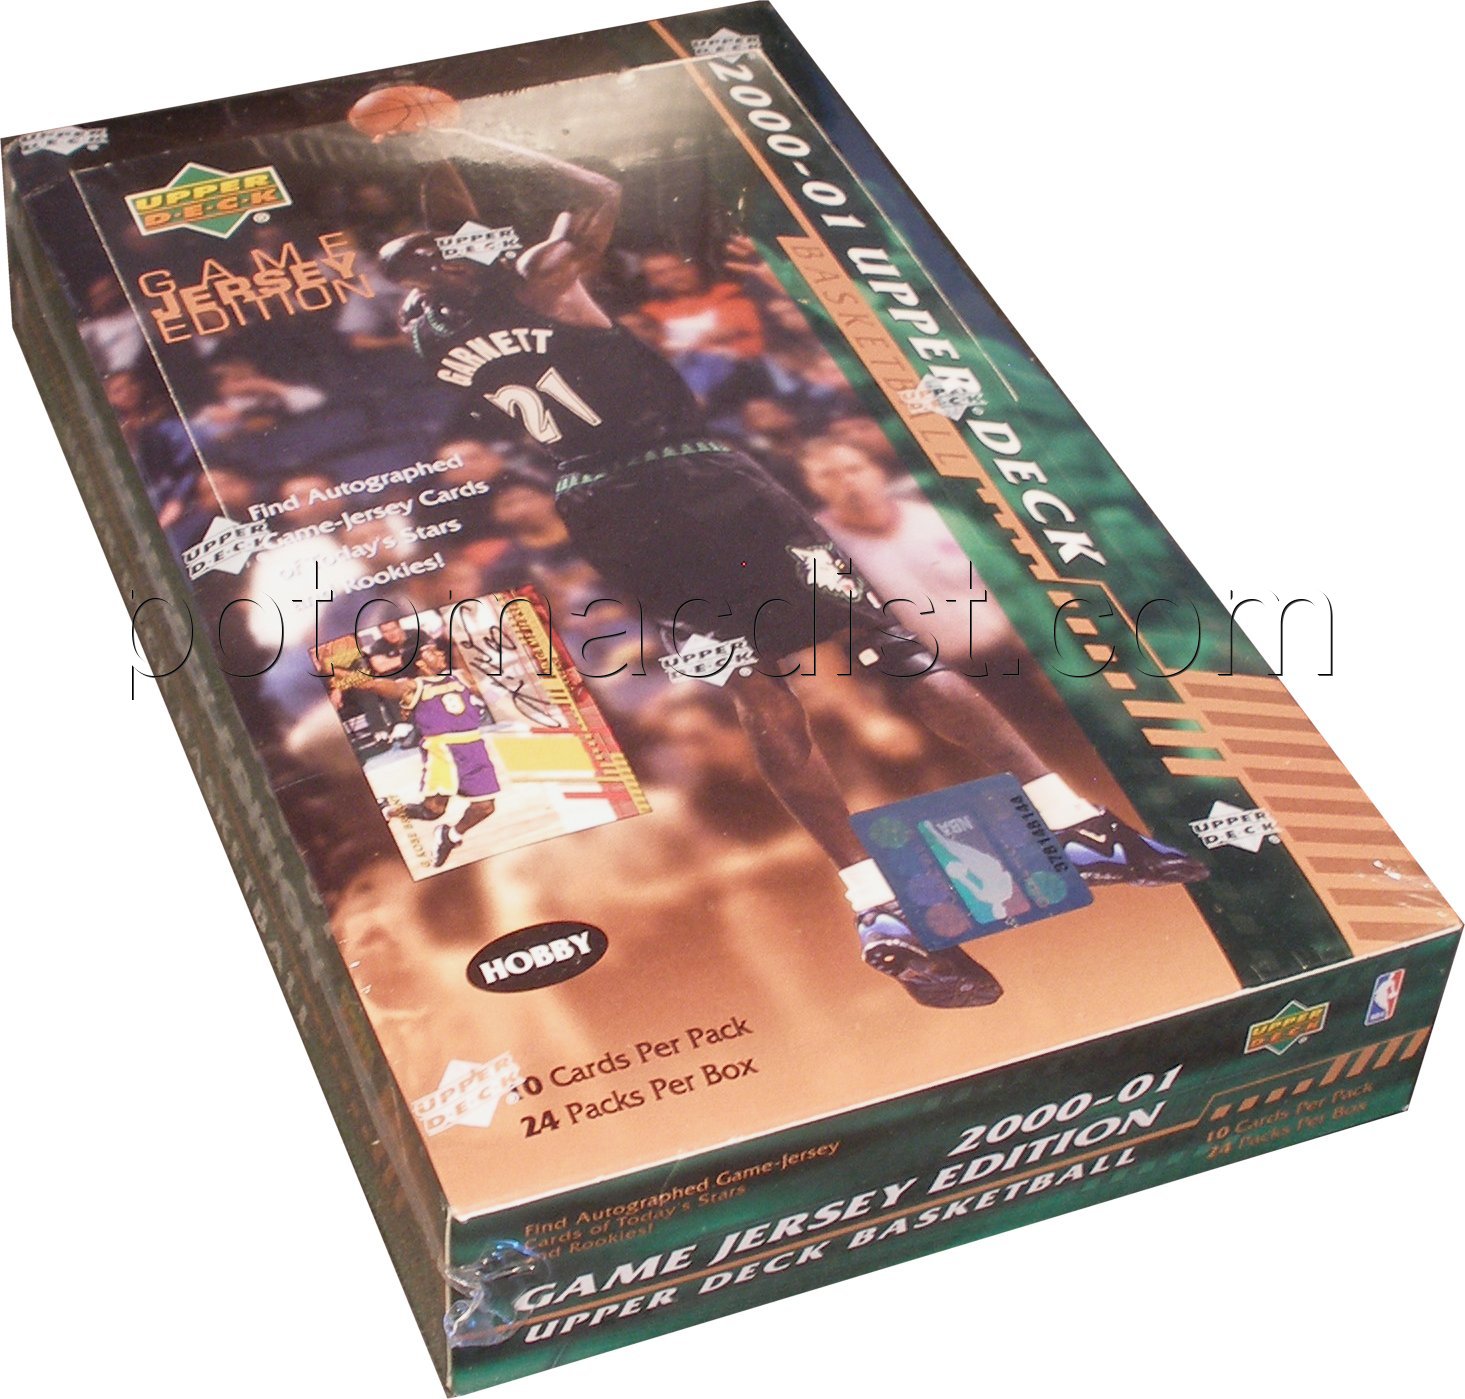 00/01 Upper Deck Series 2/Game Jersey Edition [Hobby] Basketball Box